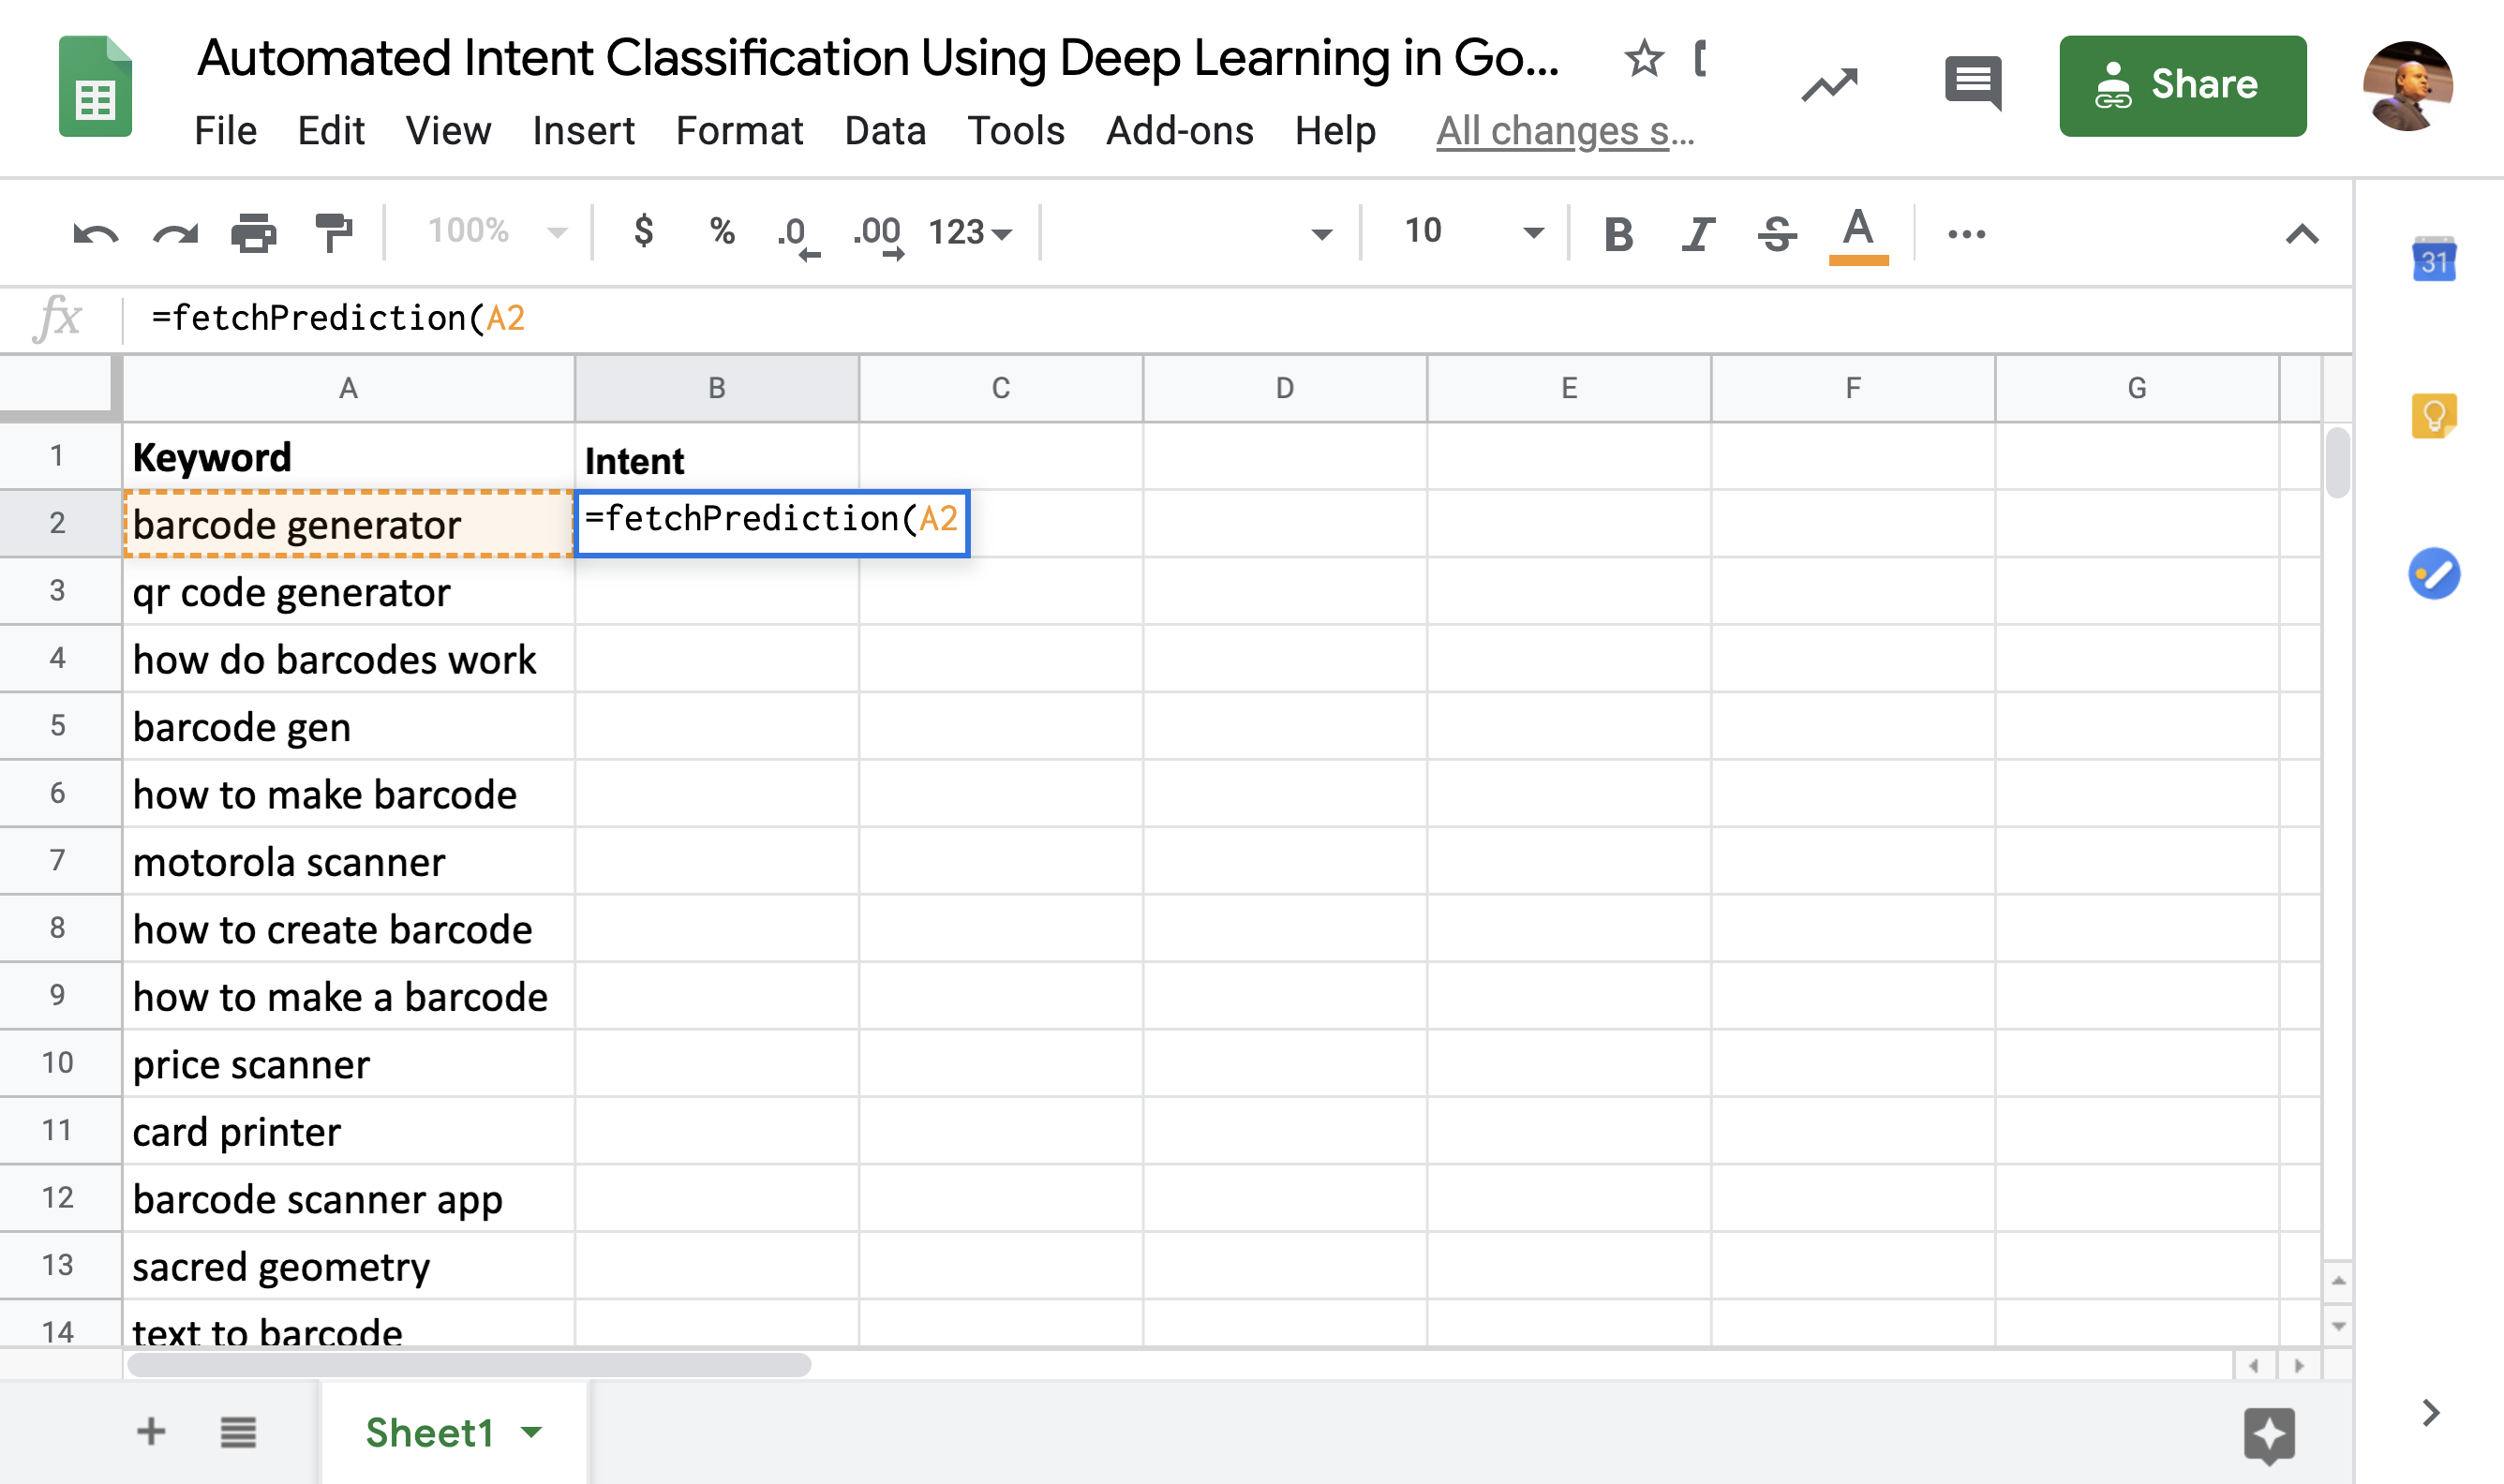 Automated Intent Classification Using Deep Learning in Google Sheets